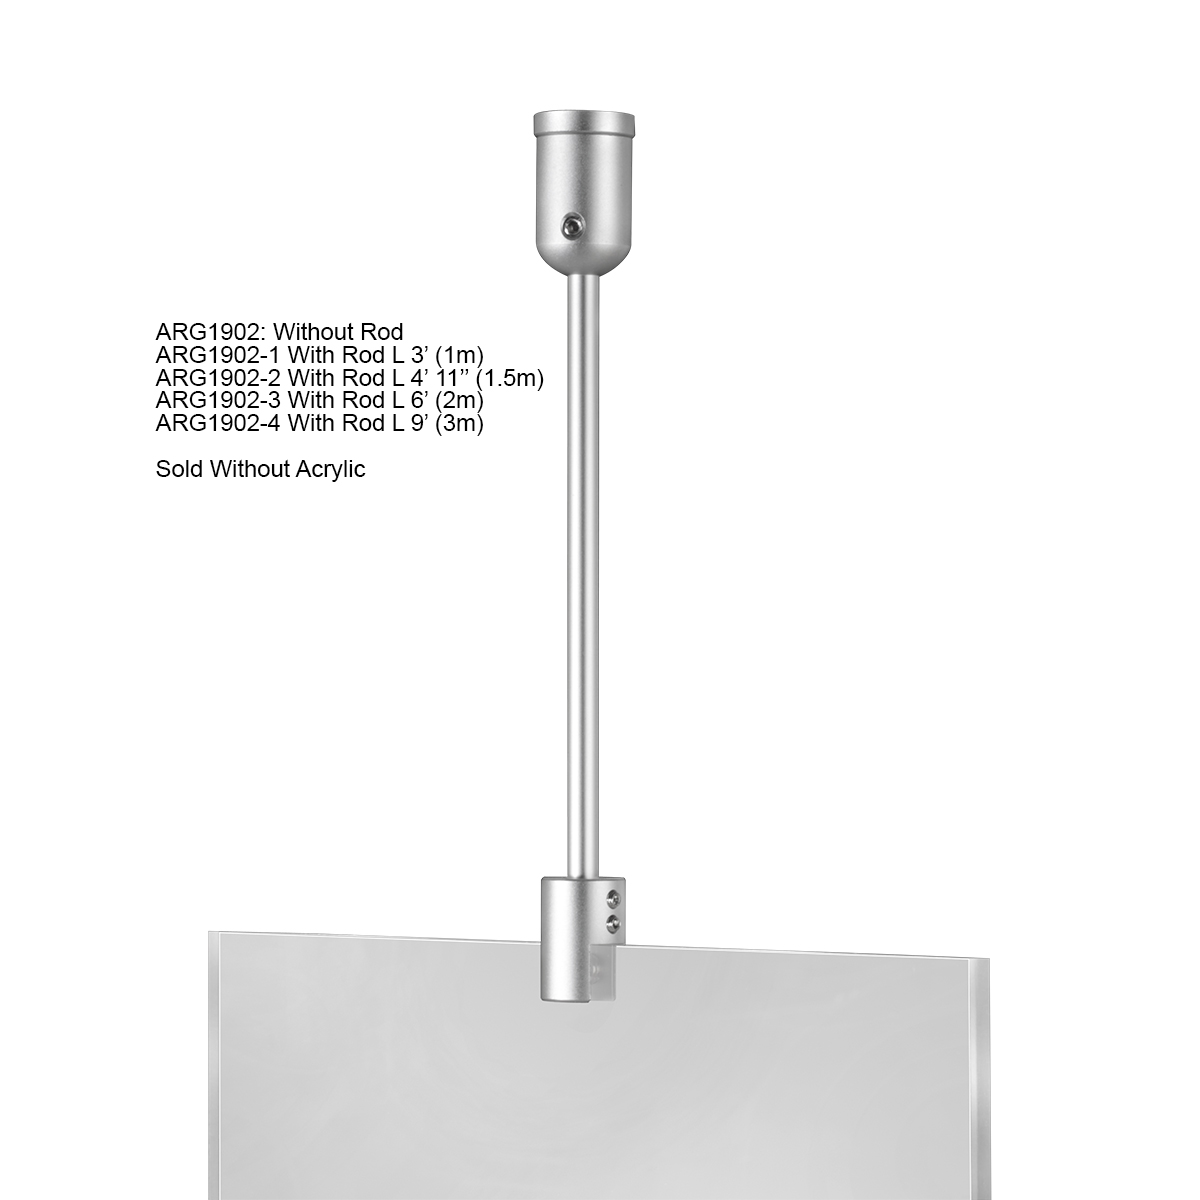 Ceiling Suspended 1/4'' Diameter Rod Kit - 1 x 4' 11'' (59'') Length - Clear Anodized Aluminum Finish for the Mount and Stainless Steel Satin Finish for the Rod